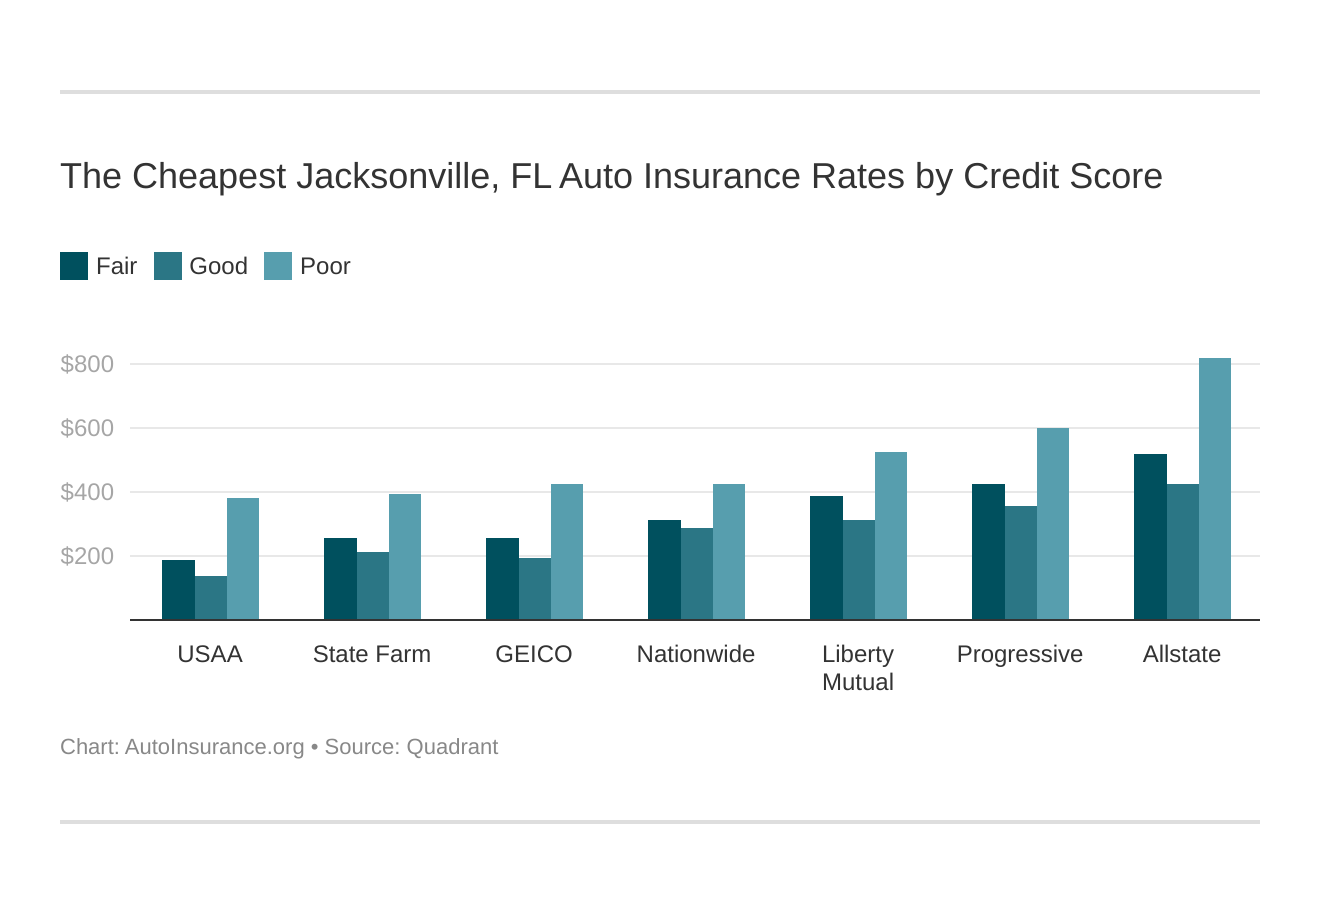 The Cheapest Jacksonville, FL Auto Insurance Rates by Credit Score